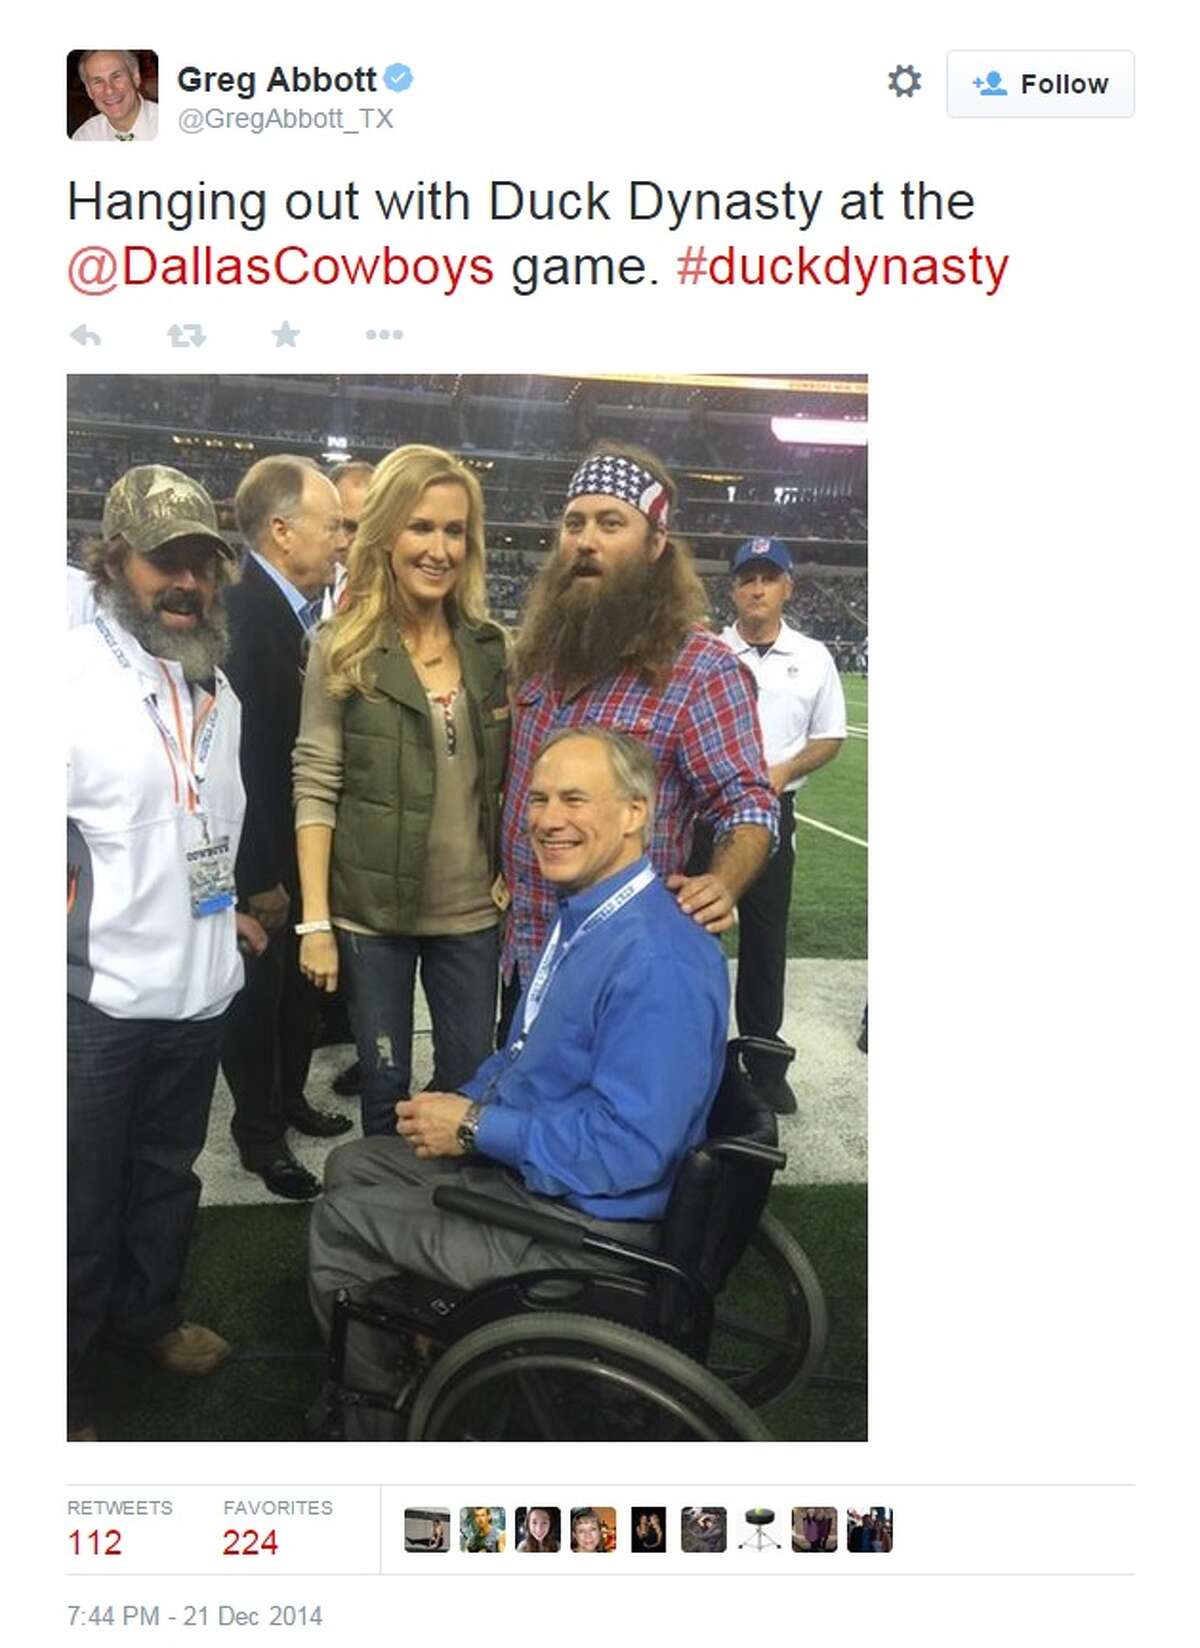 Governor-elect Greb Abbott spent some time with stars of "Duck Dynasty" at a Dallas Cowboys game.